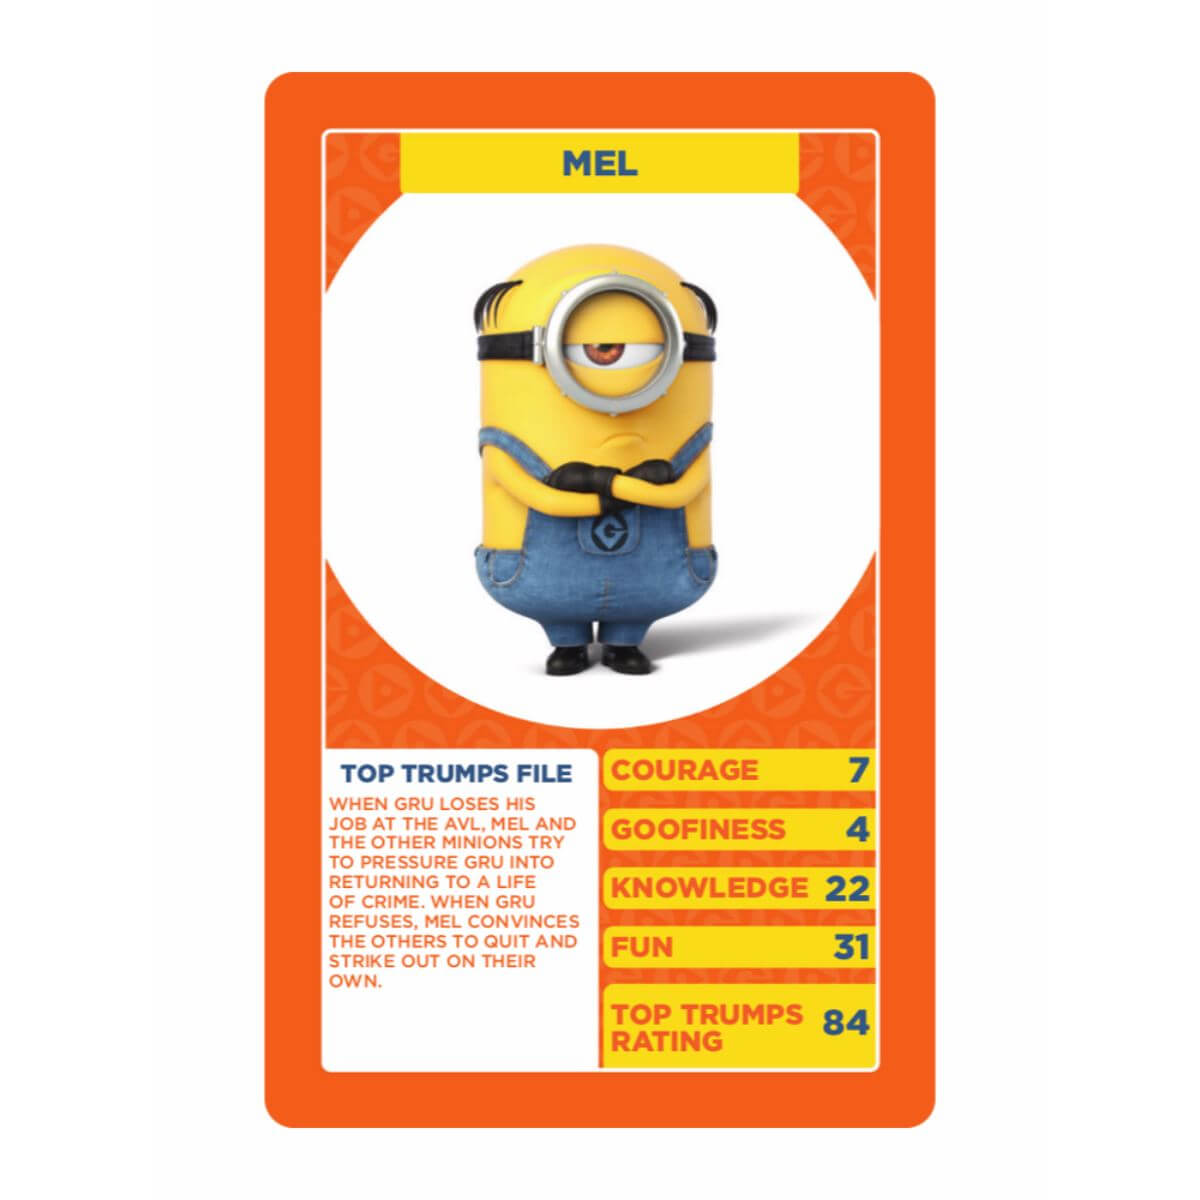 details-about-despicable-me-3-top-trumps-card-game-for-top-trump-card-template-professional